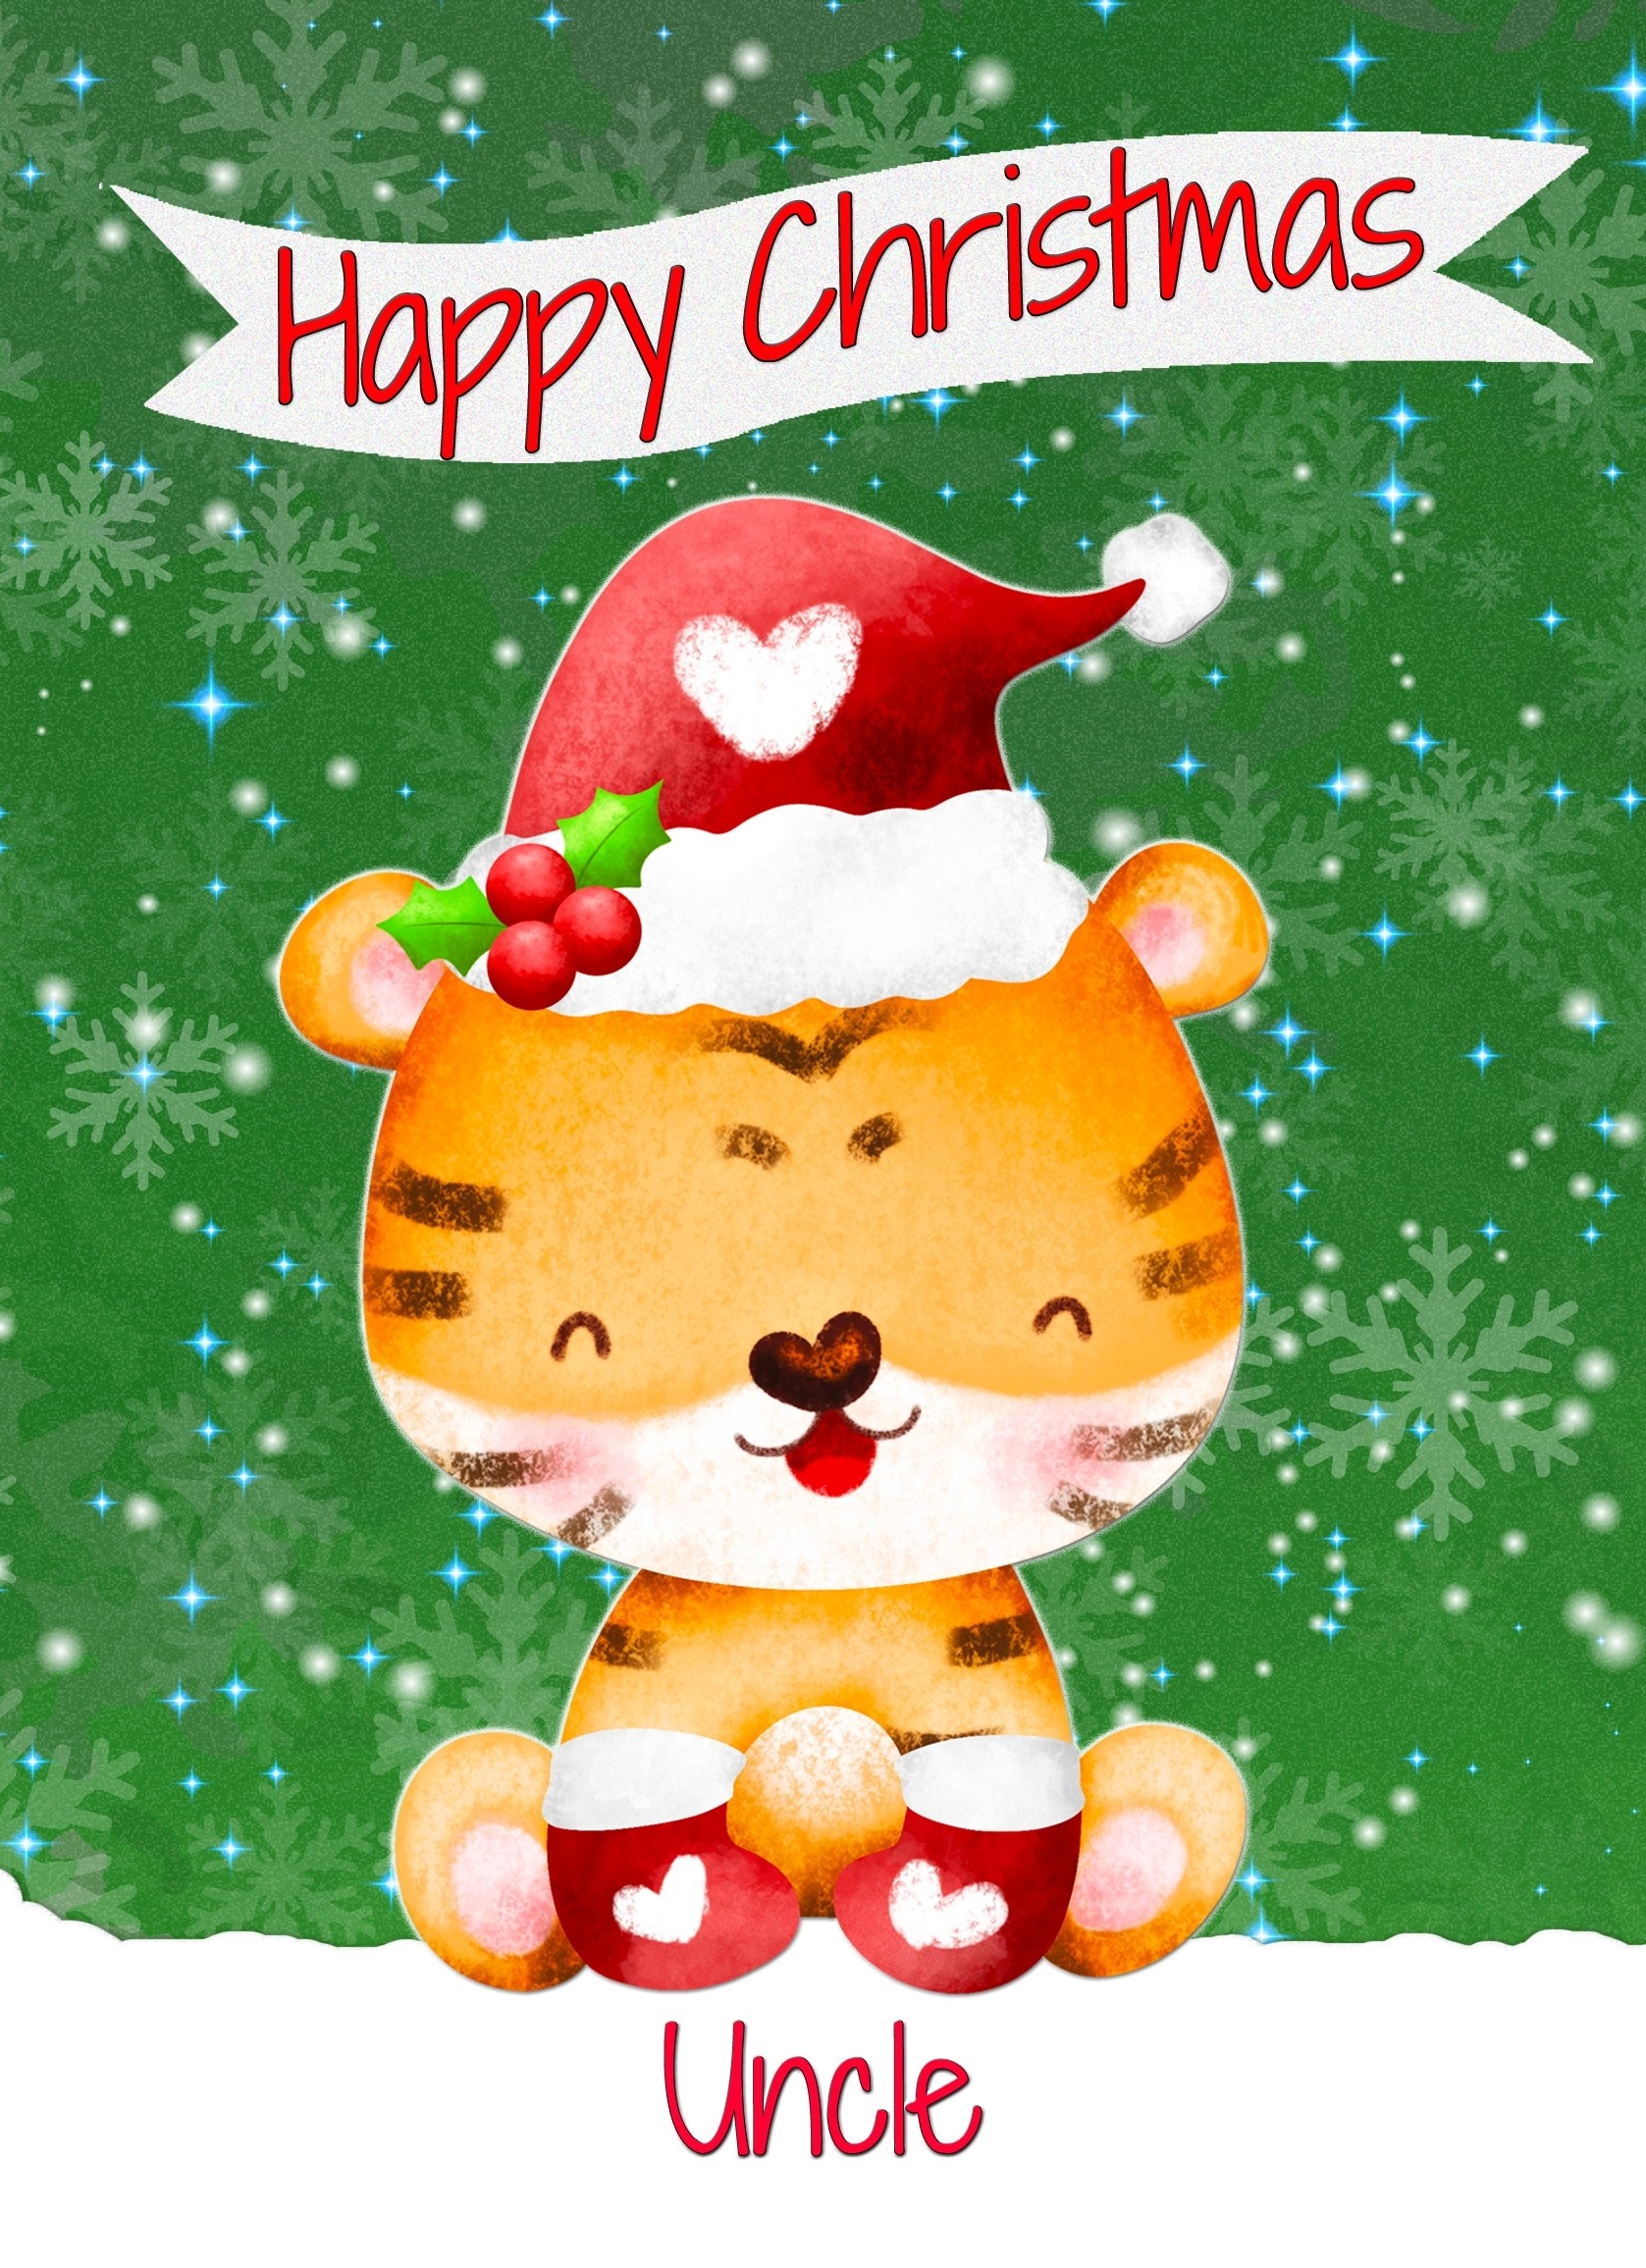 Christmas Card For Uncle (Happy Christmas, Tiger)